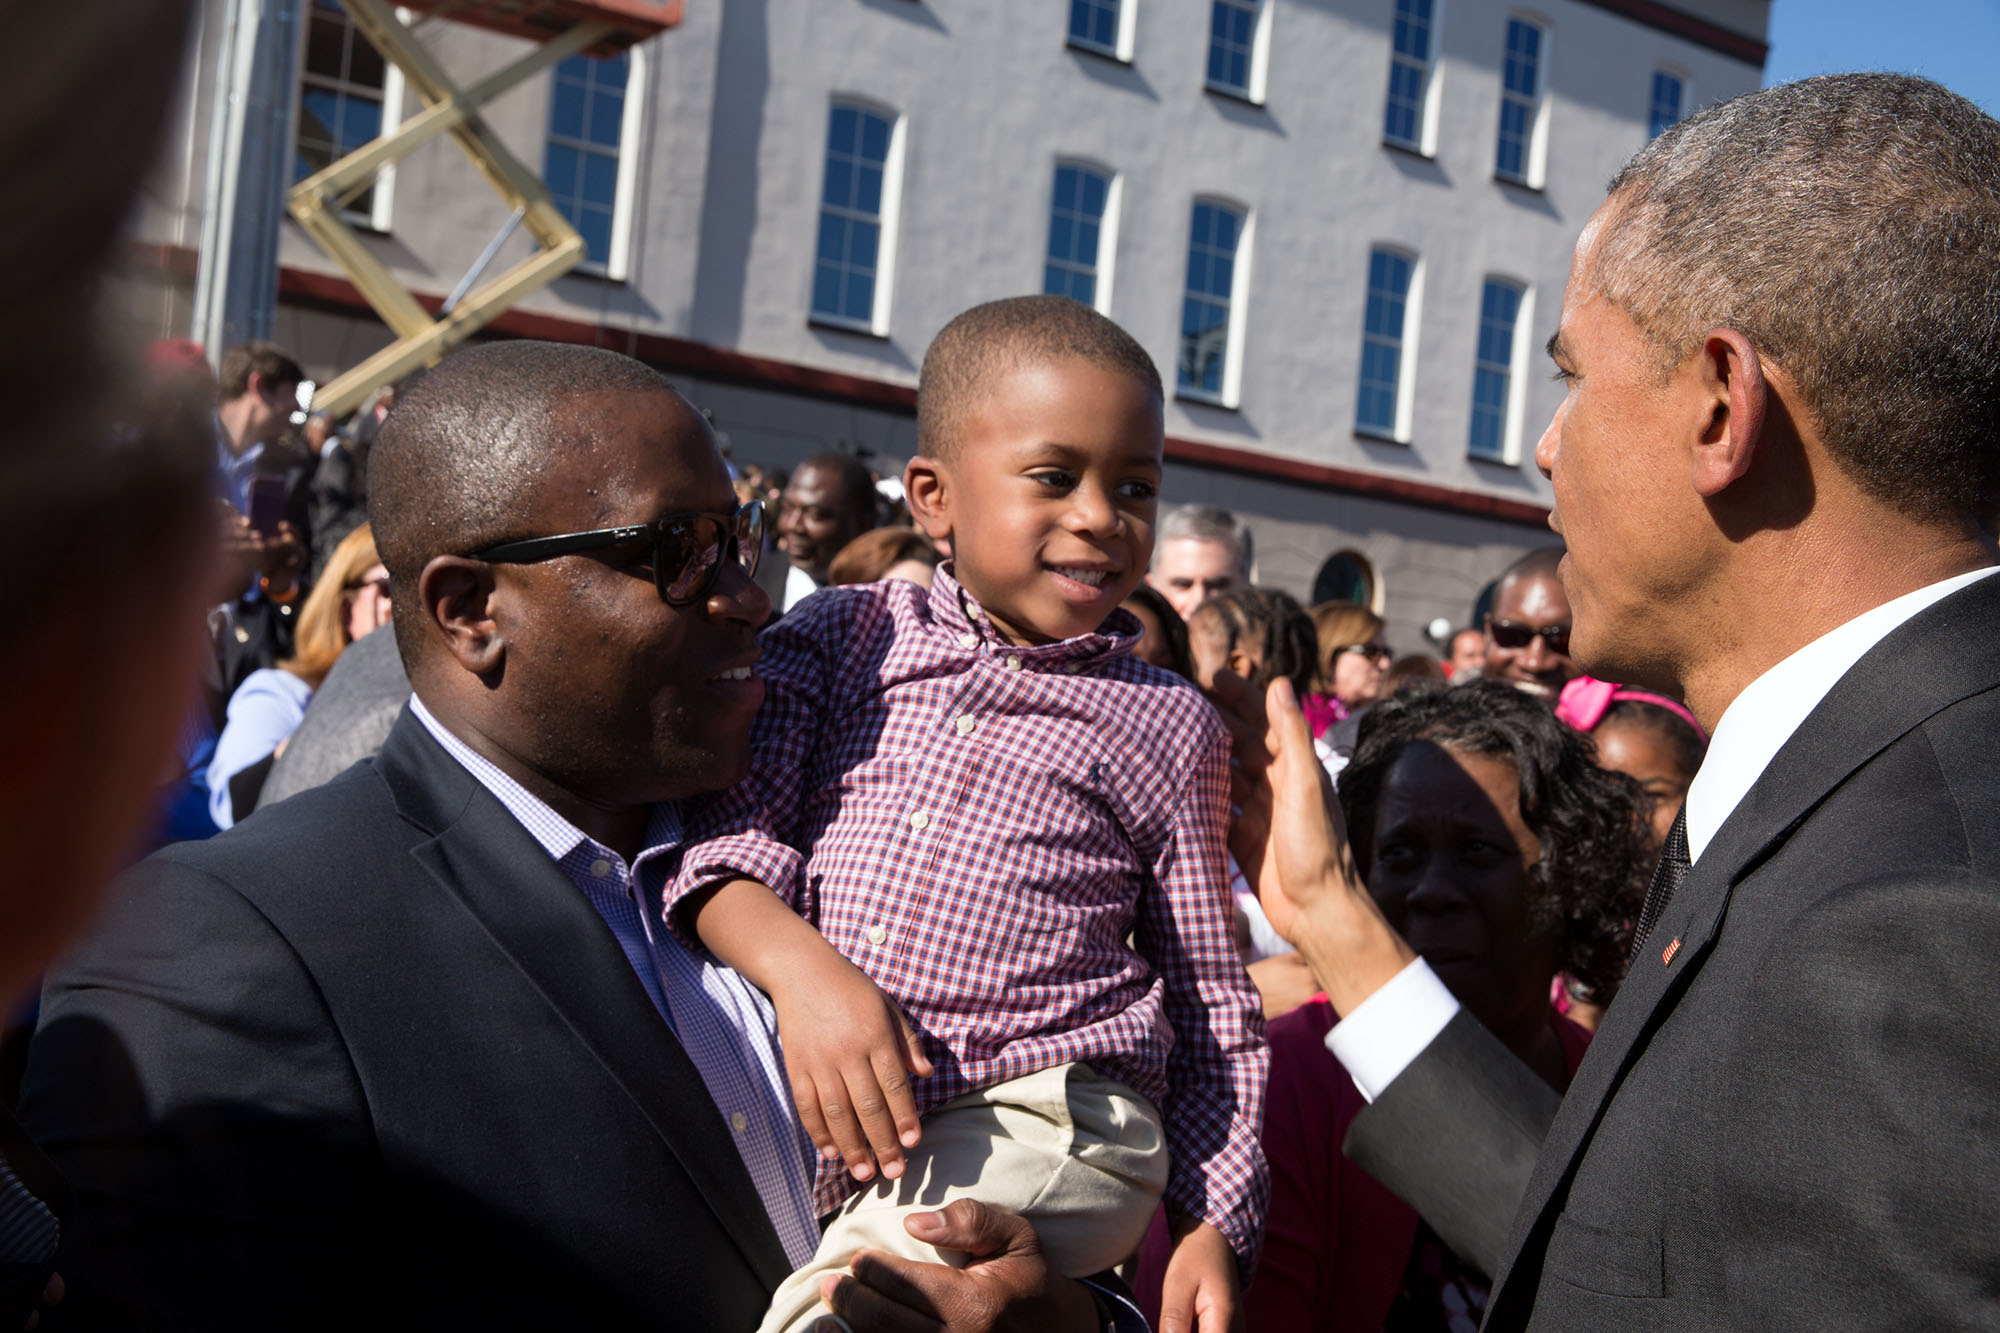 The President greets a youngster in the crowd. (Official White House Photo by Pete Souza)